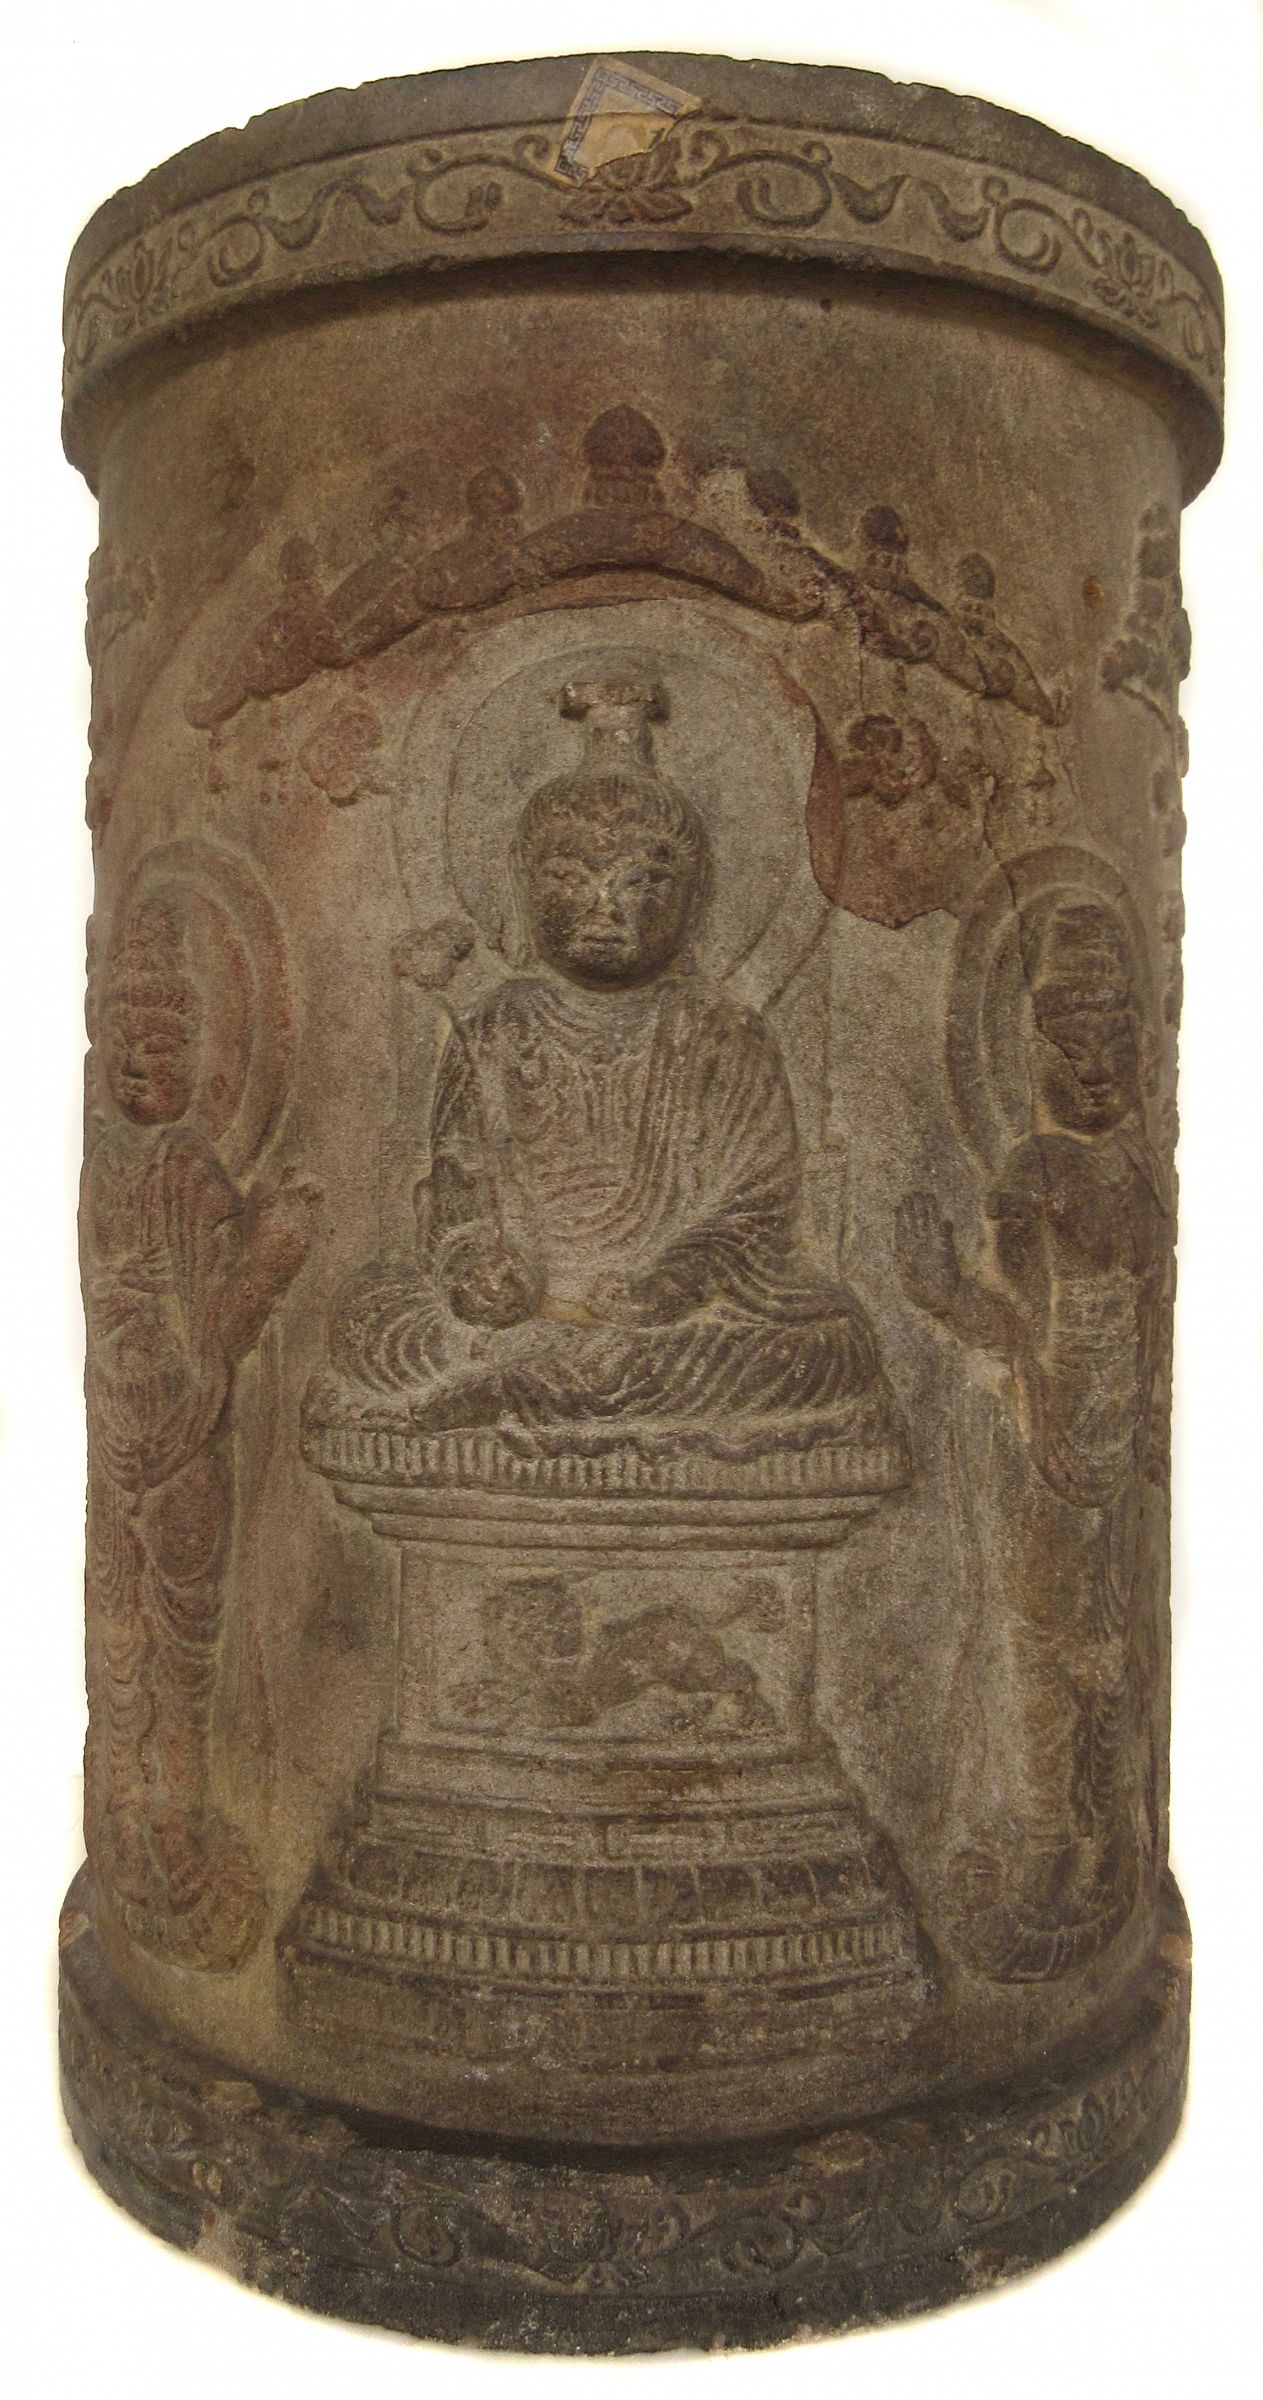 Chinese Tang Dynasty Sandstone Buddhist Sutra Container